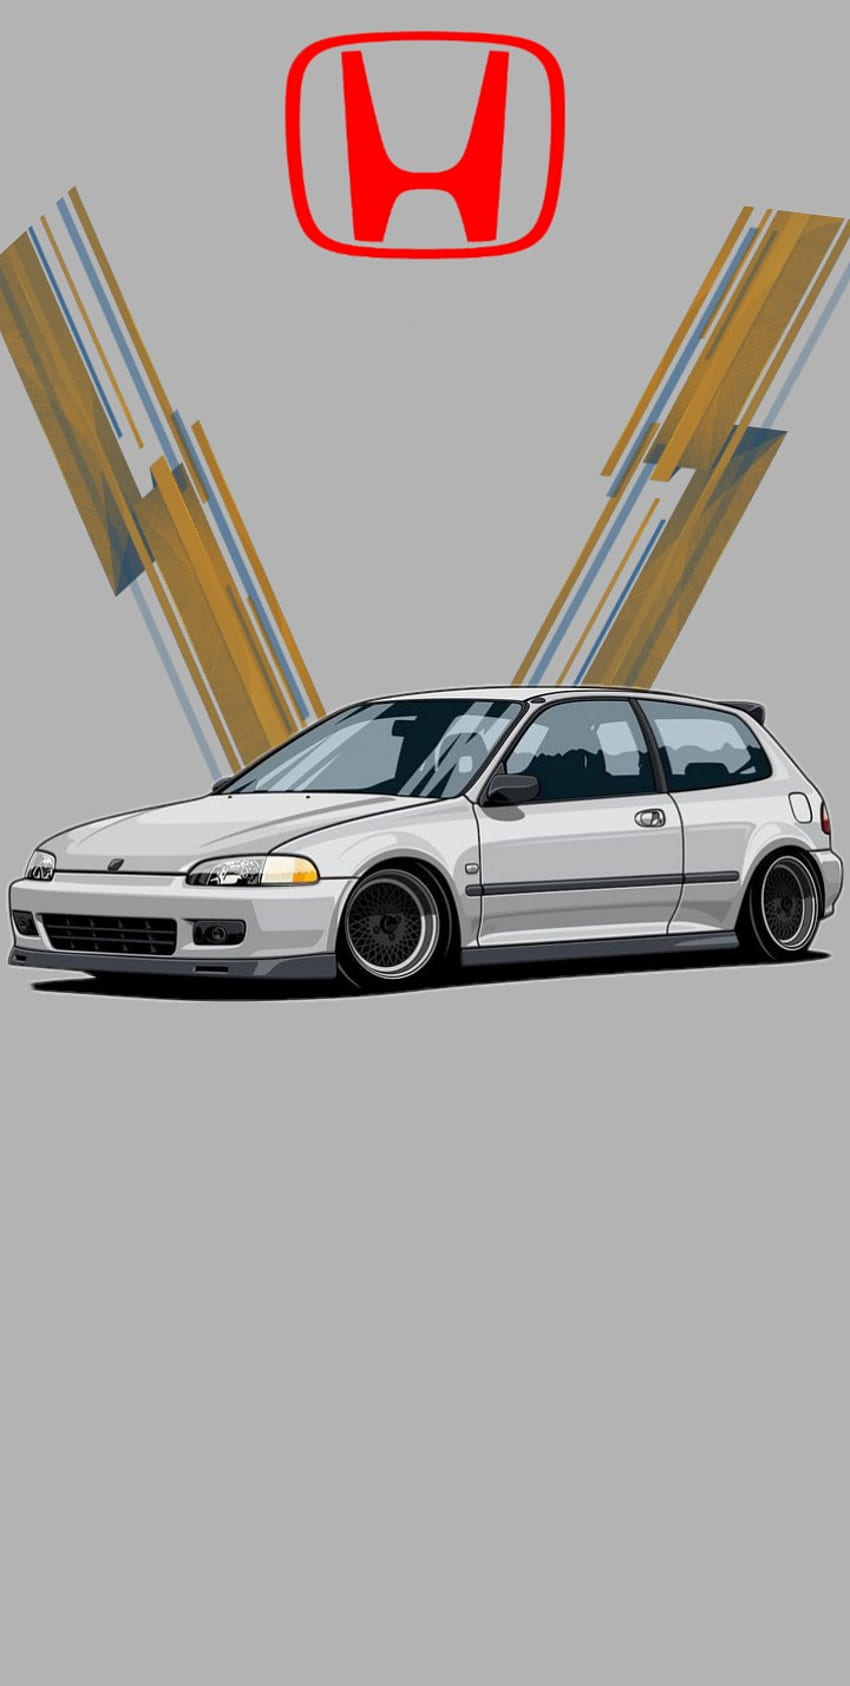 41+ Honda Wallpapers: HD, 4K, 5K for PC and Mobile | Download free images  for iPhone, Android